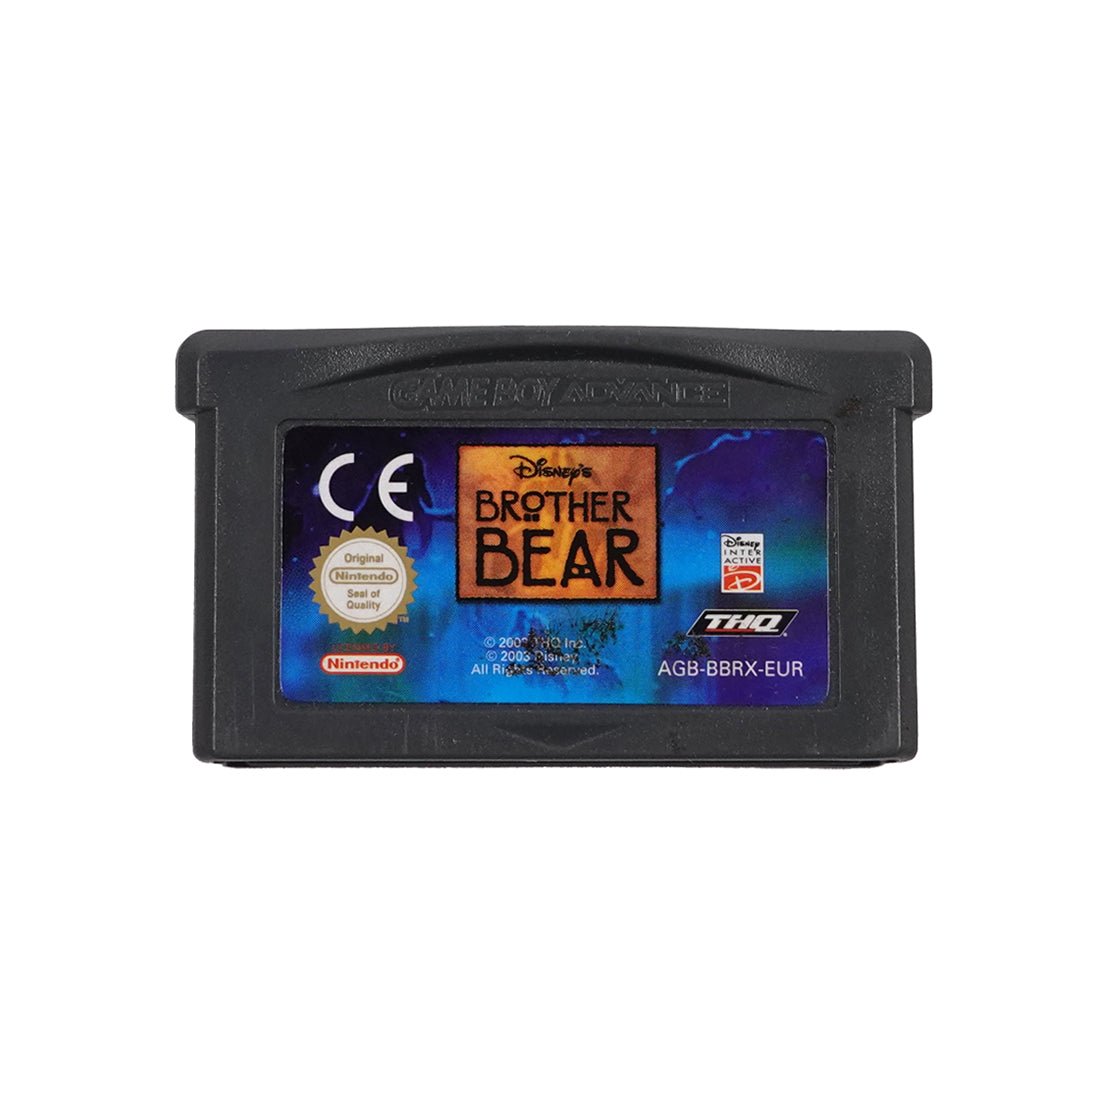 (Pre-Owned) Brother Bear - Gameboy Advance - Store 974 | ستور ٩٧٤